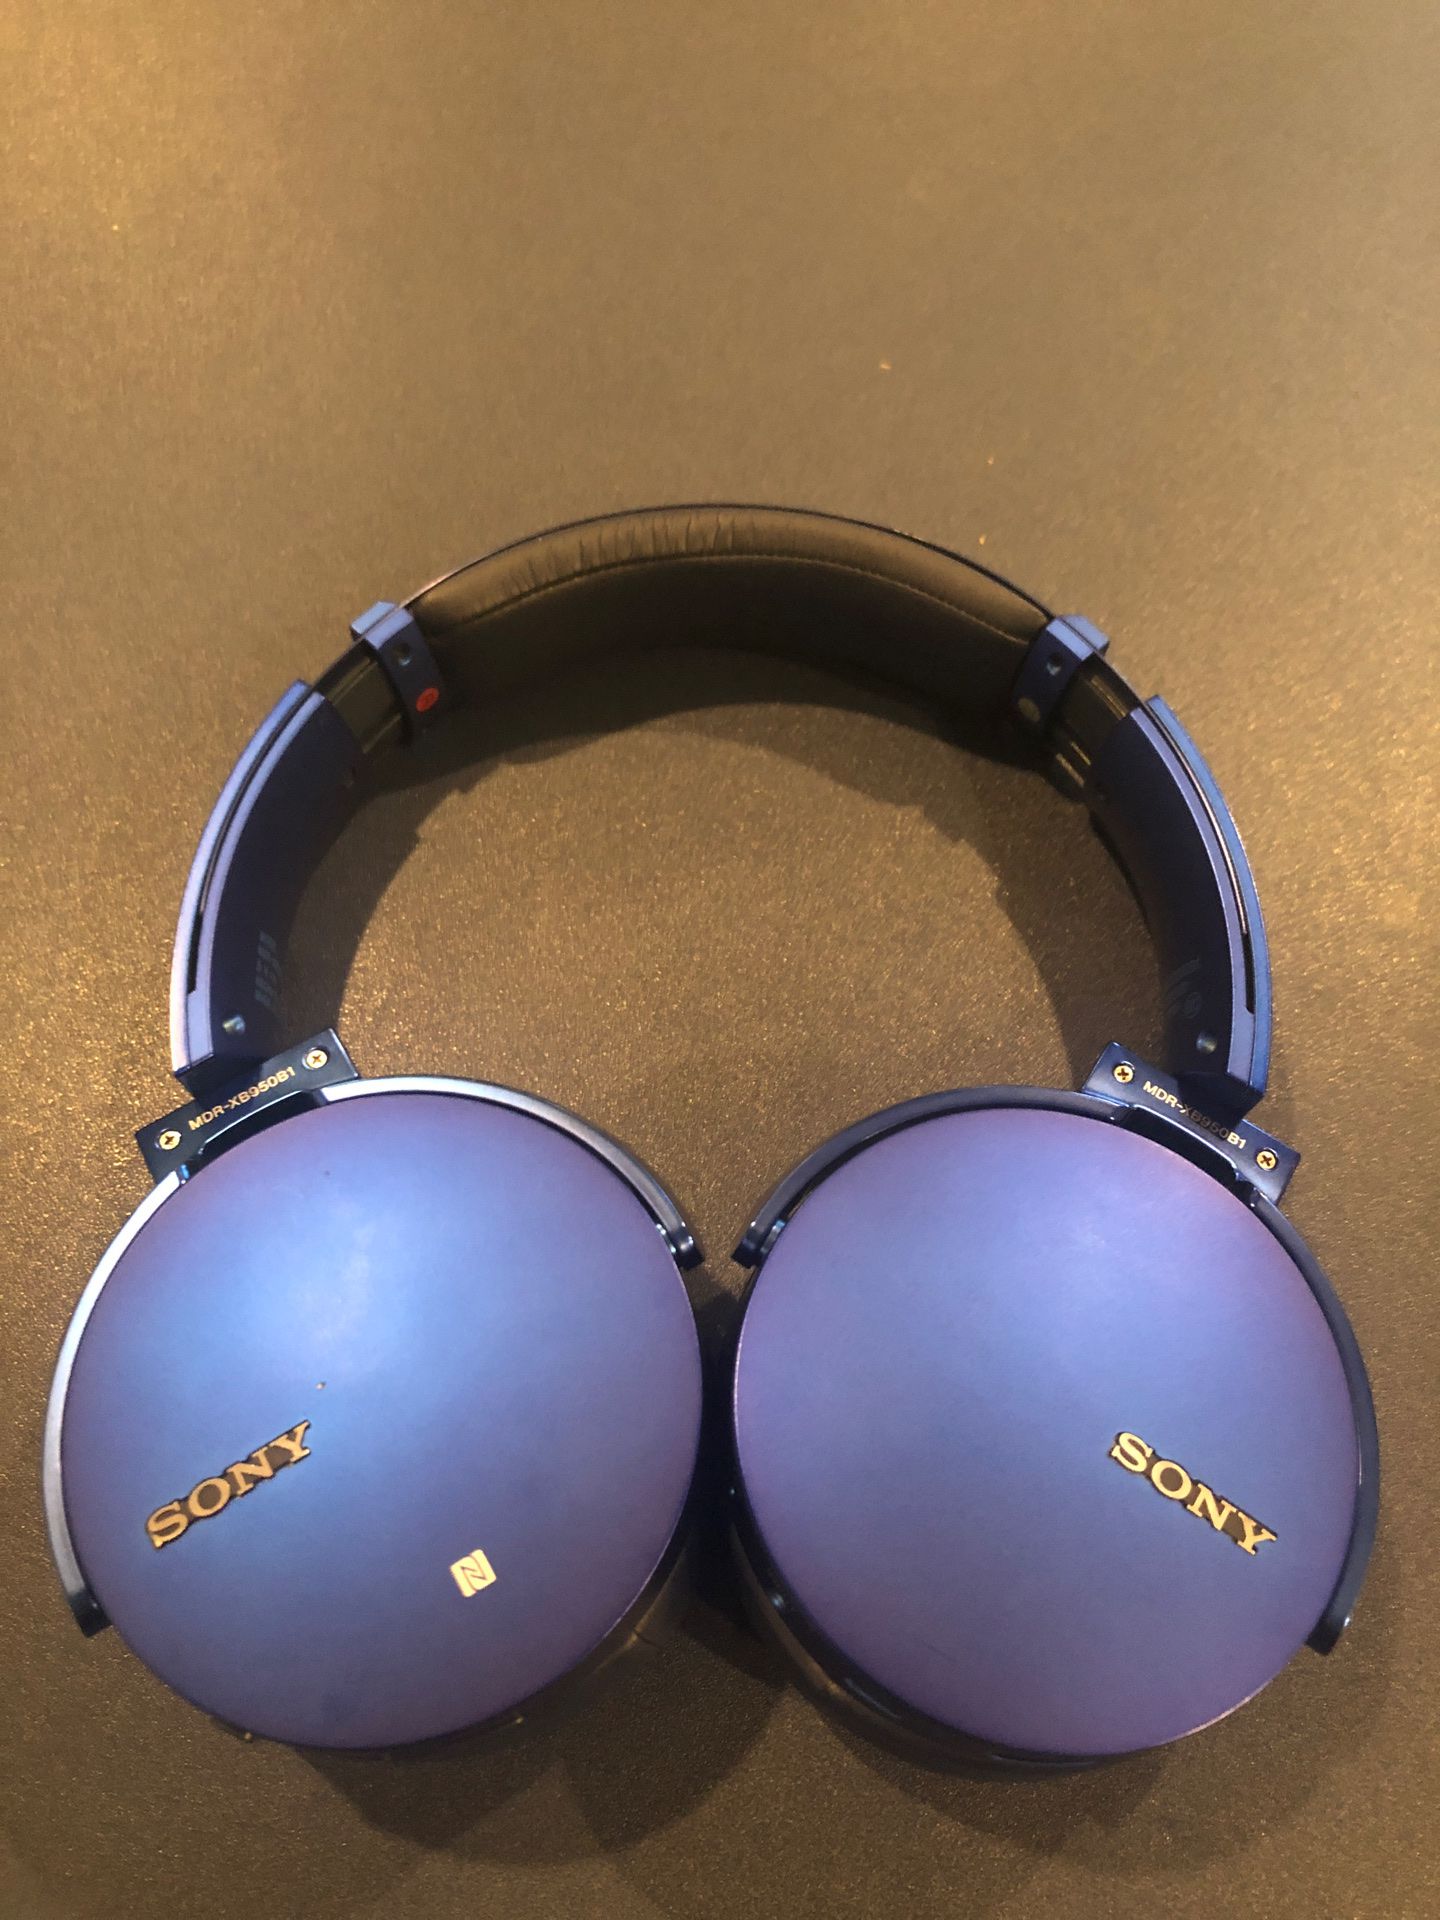 Sony wireless bass boosted headphones